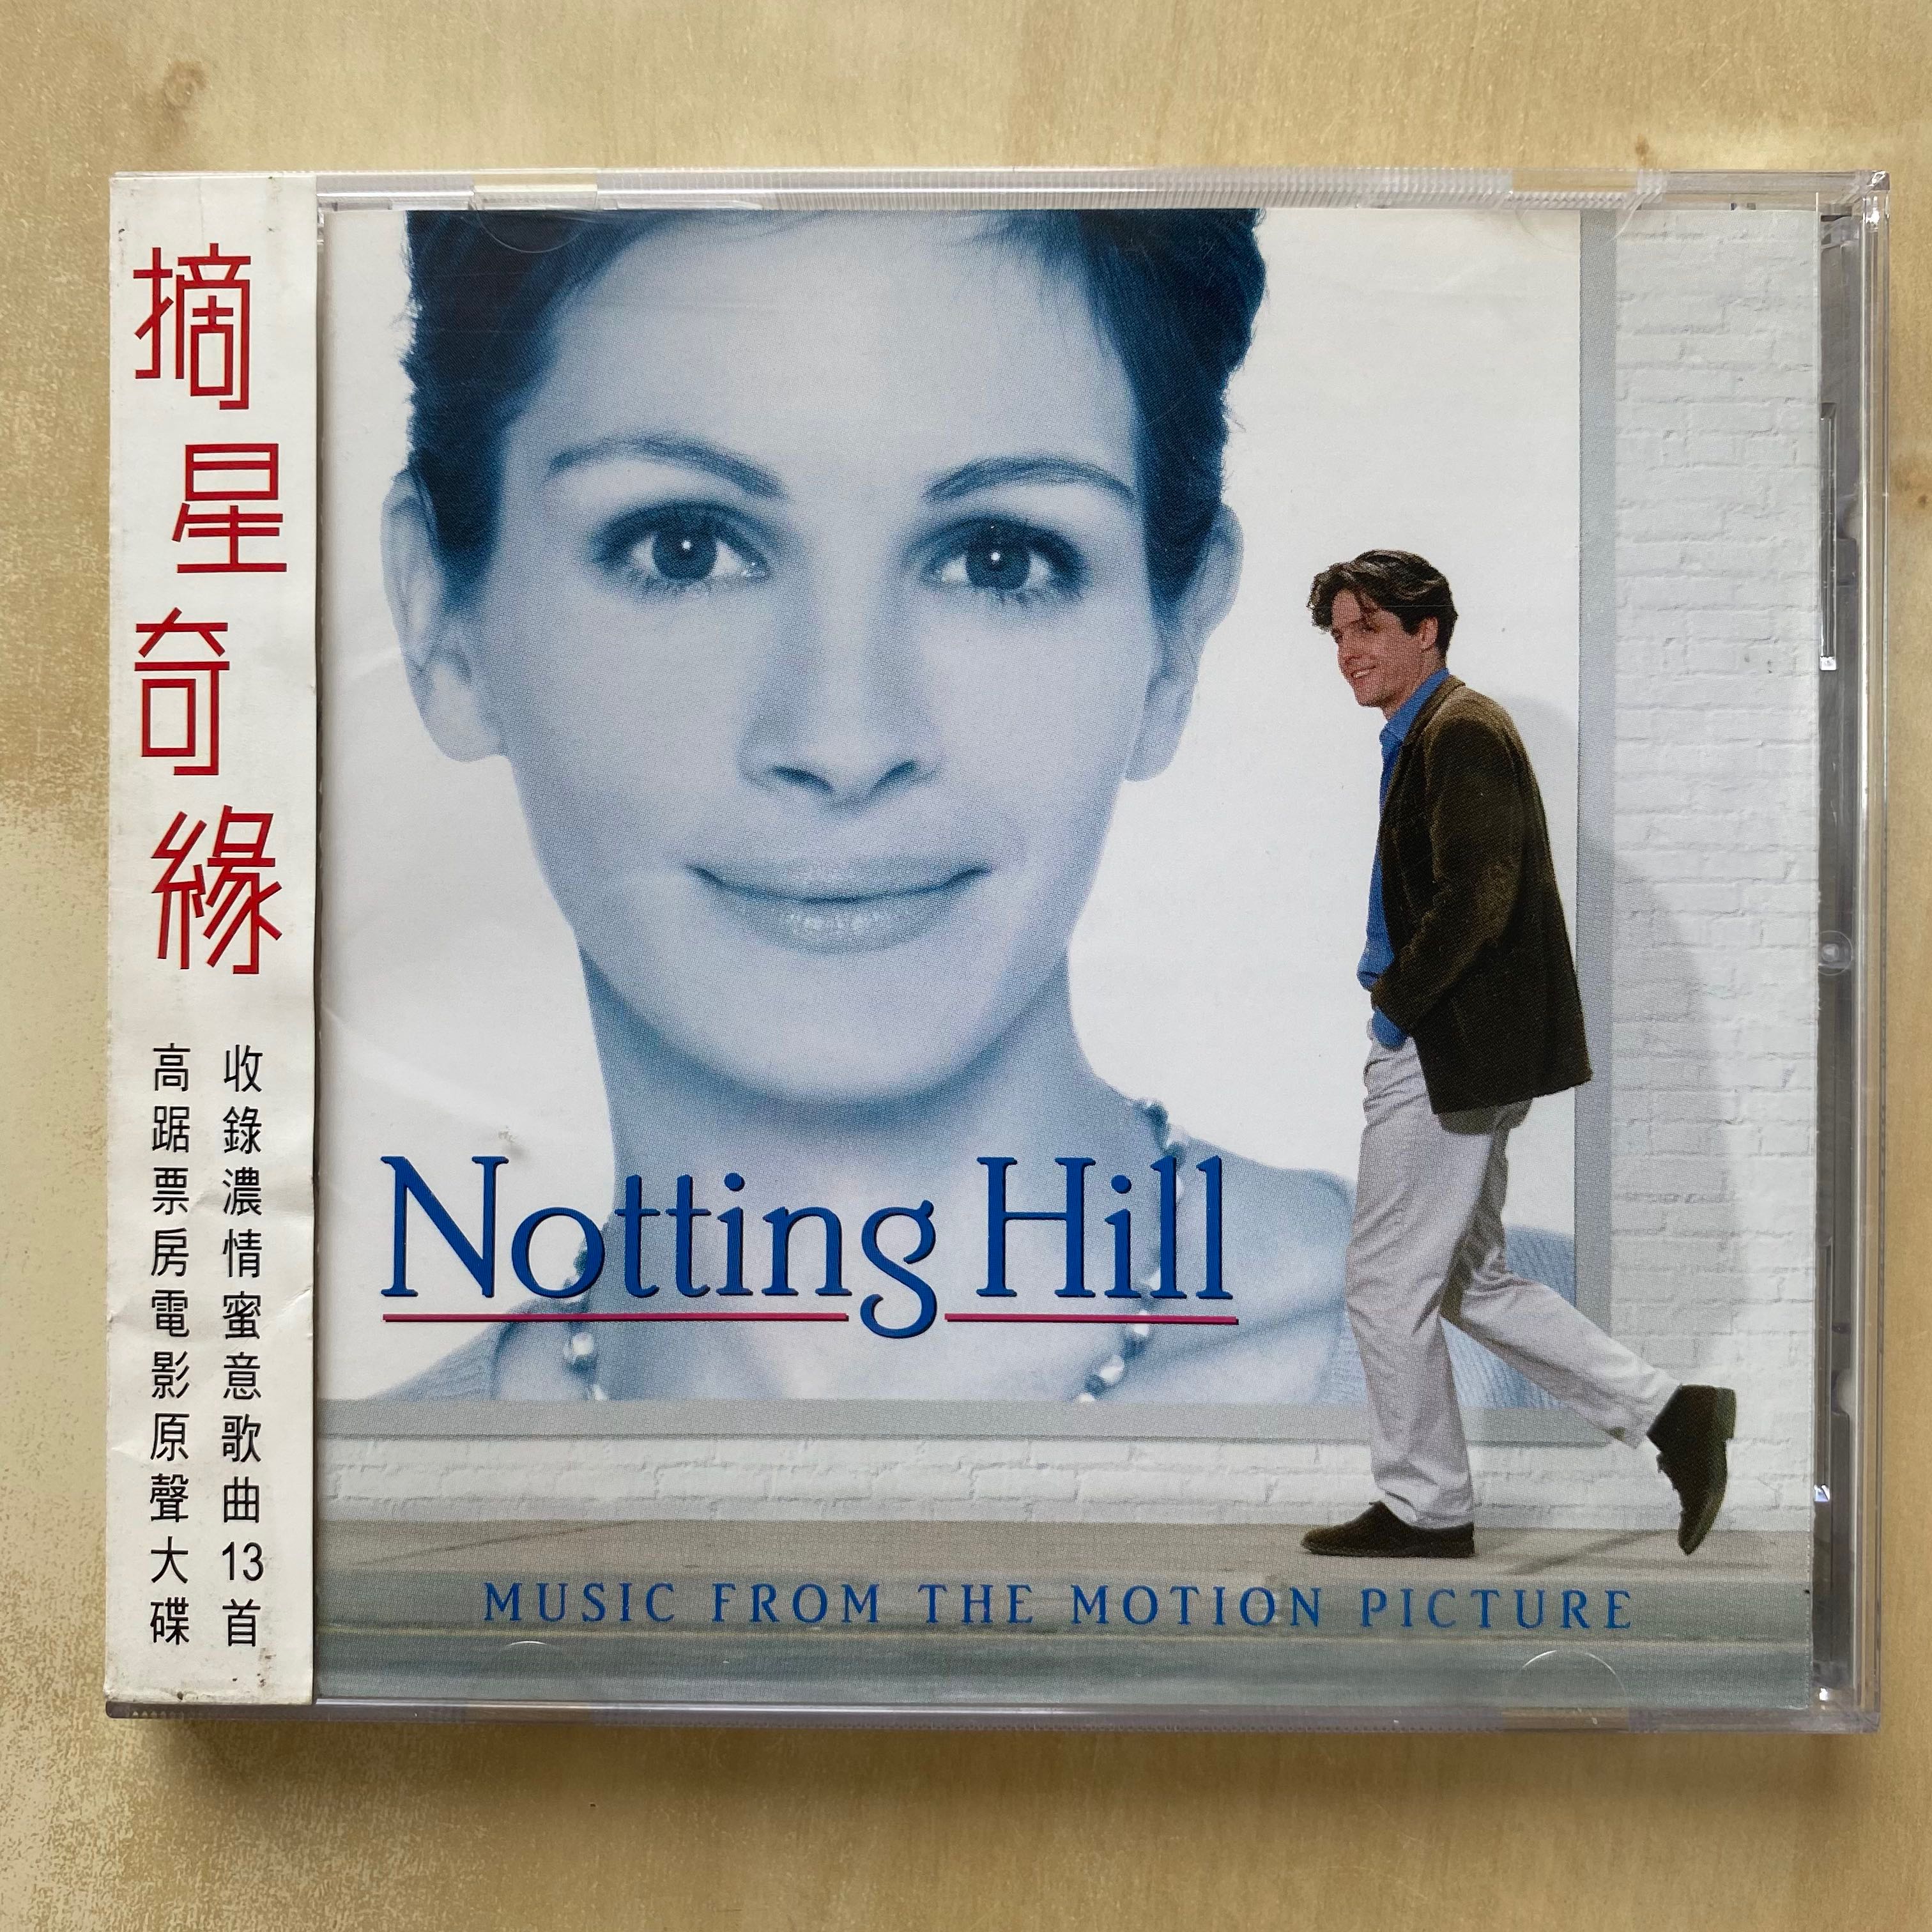 CD丨摘星奇緣電影原聲大碟/ Notting Hill Music from the Motion